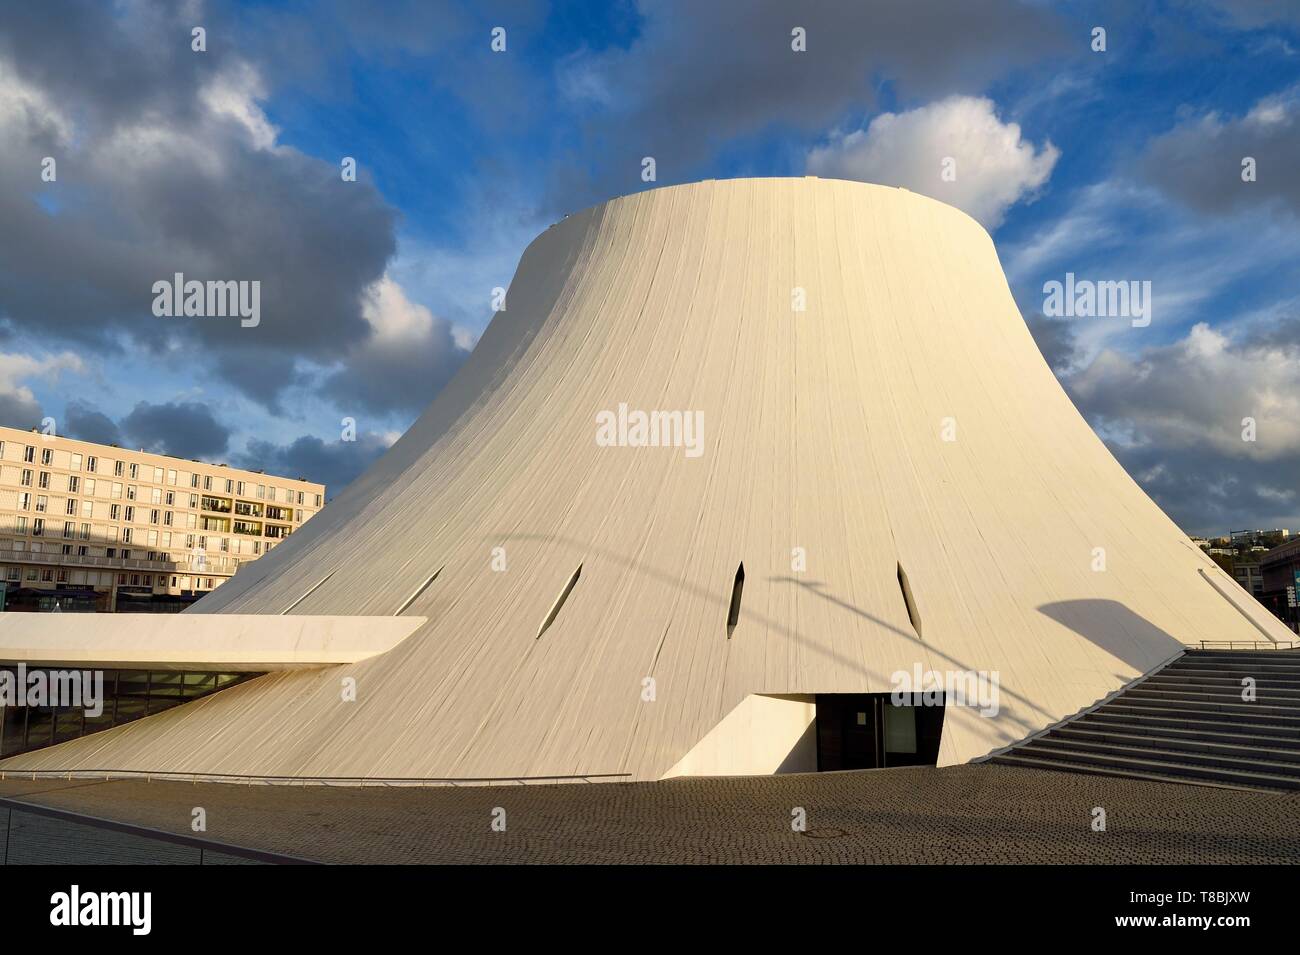 France, Seine Maritime, Le Havre, Downtown rebuilt by Auguste Perret listed as World Heritage by UNESCO, the cultural center called Volcano created by Oscar Niemeyer Stock Photo